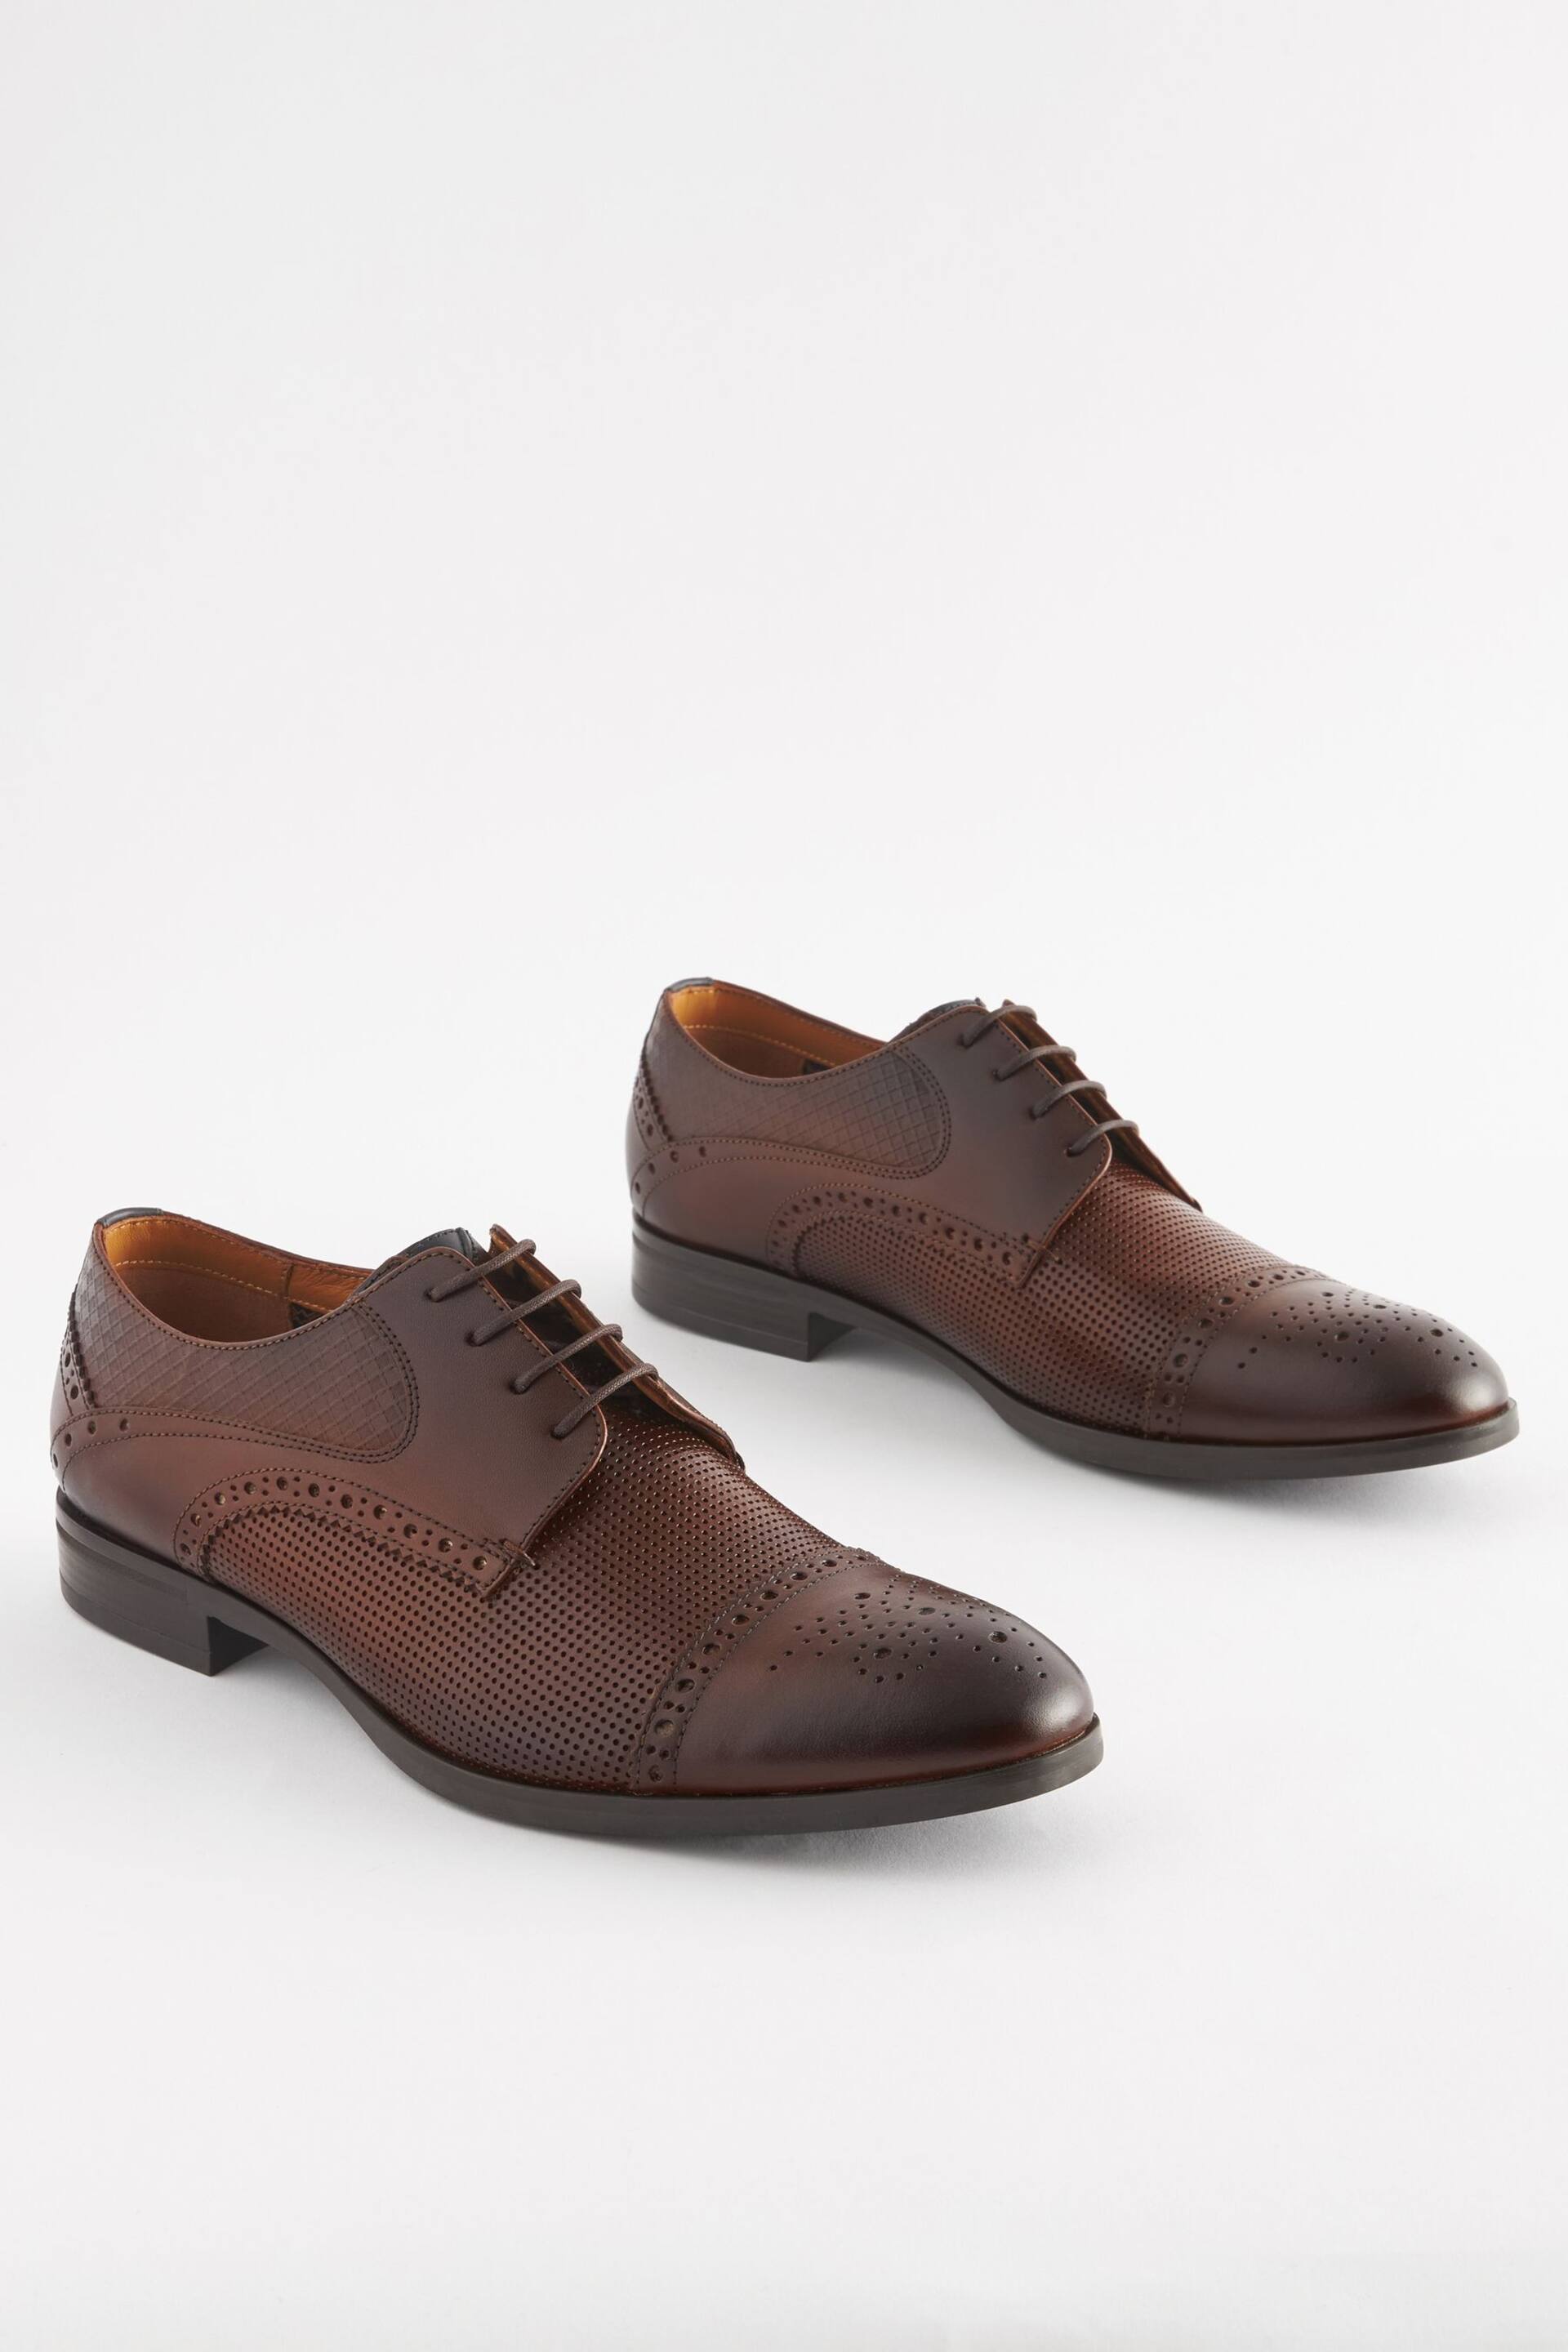 Brown Leather Embossed Brogues Shoes - Image 1 of 7